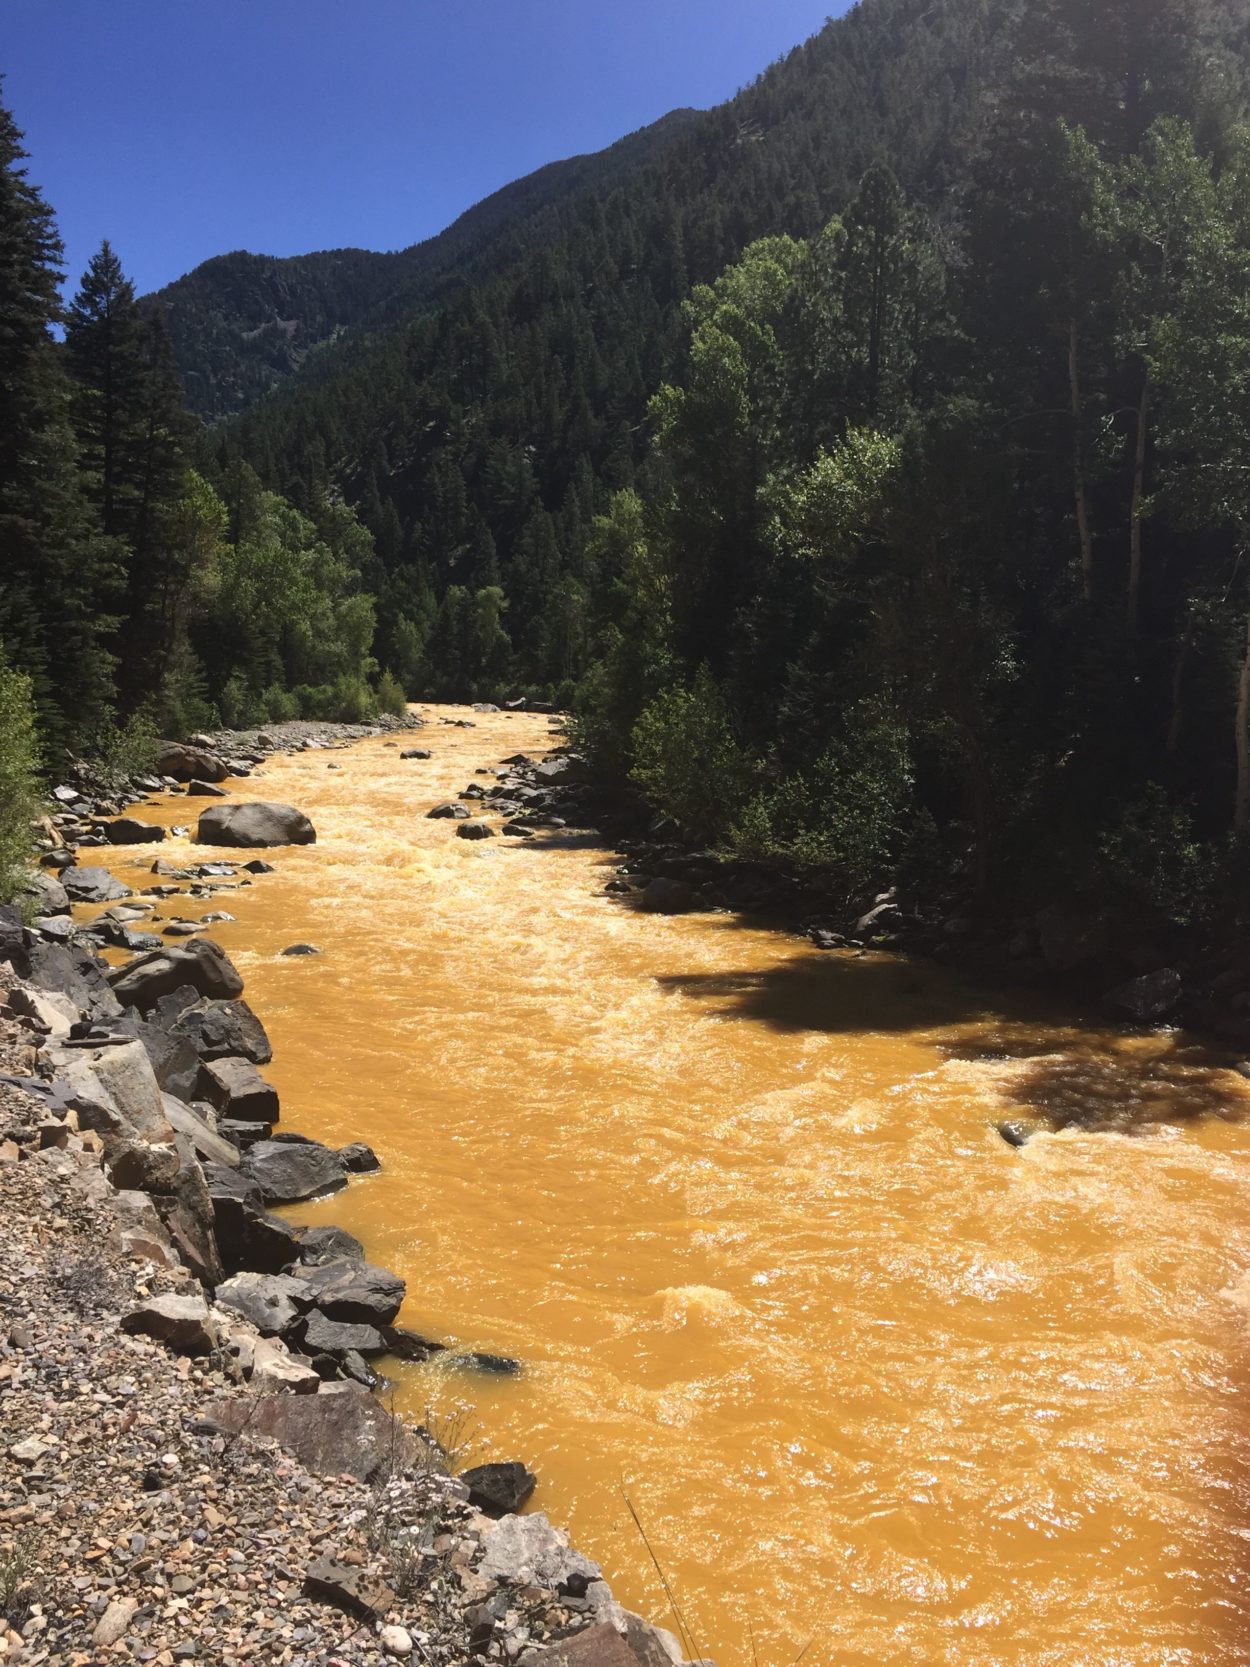 State says it plans to sue EPA over mine spill